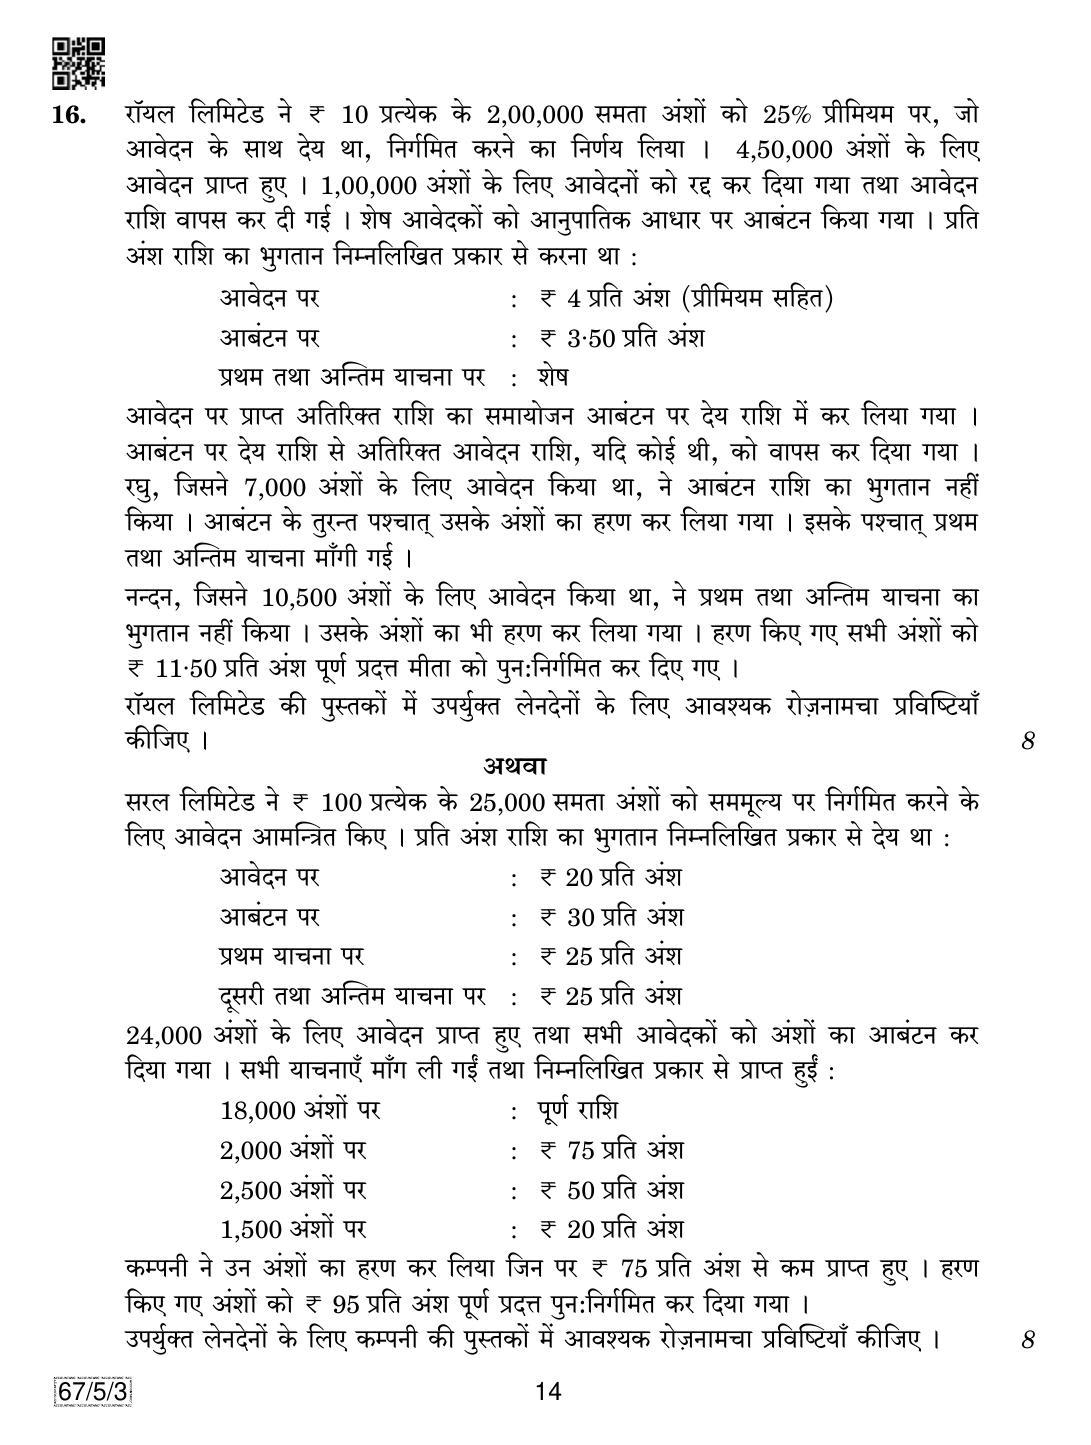 CBSE Class 12 67-5-3 Accountancy 2019 Question Paper - Page 14